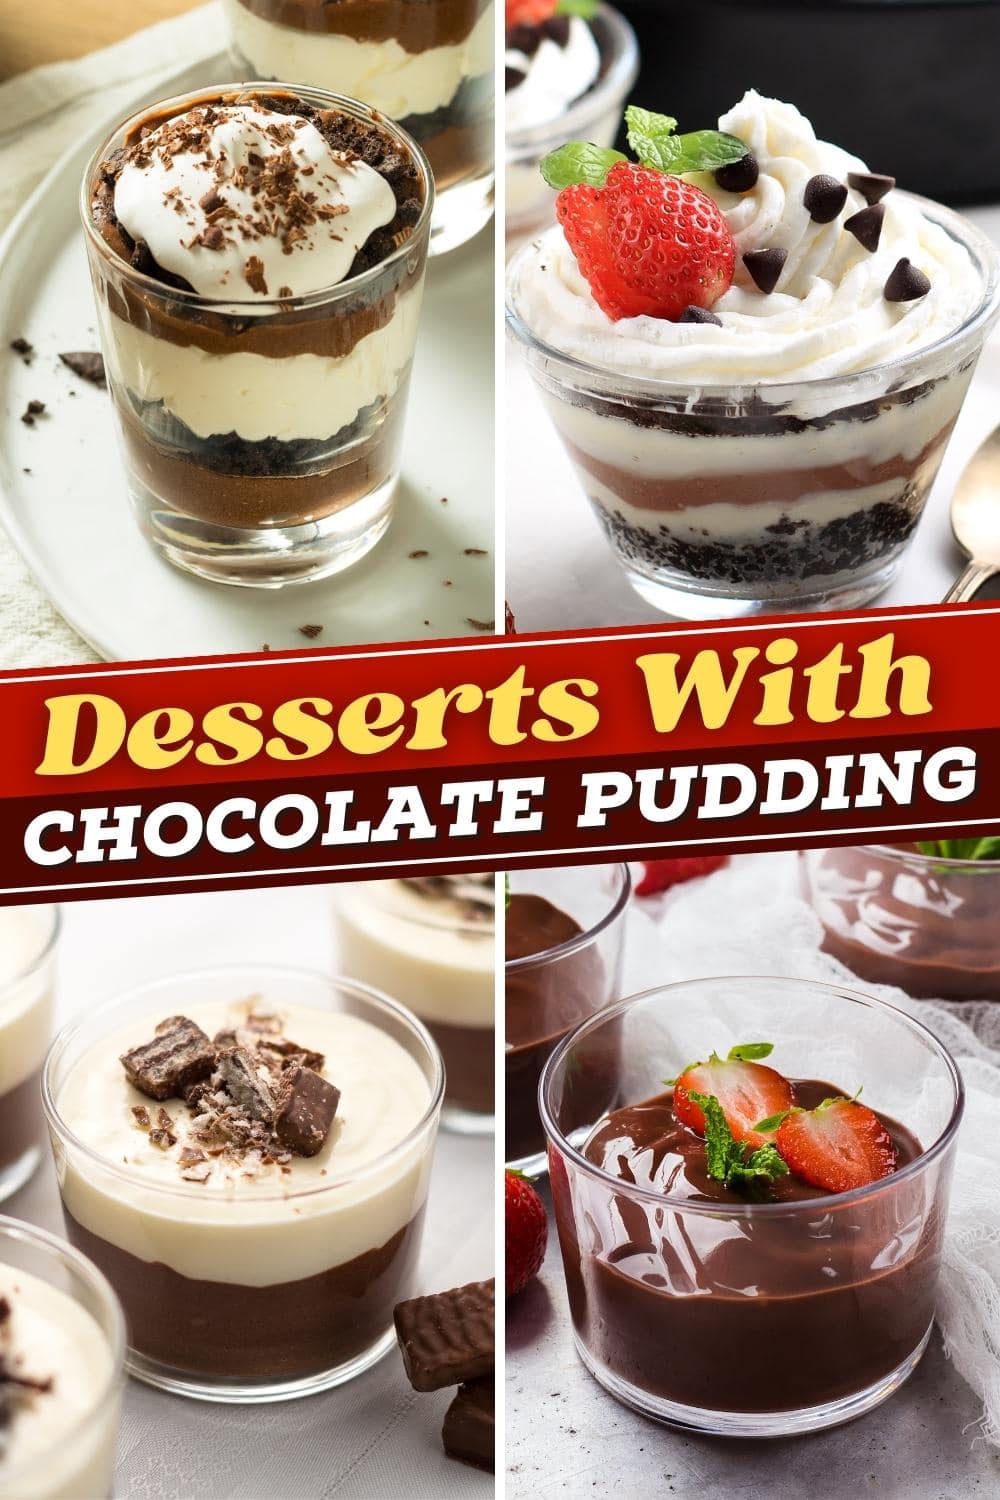 Desserts with Chocolate Pudding